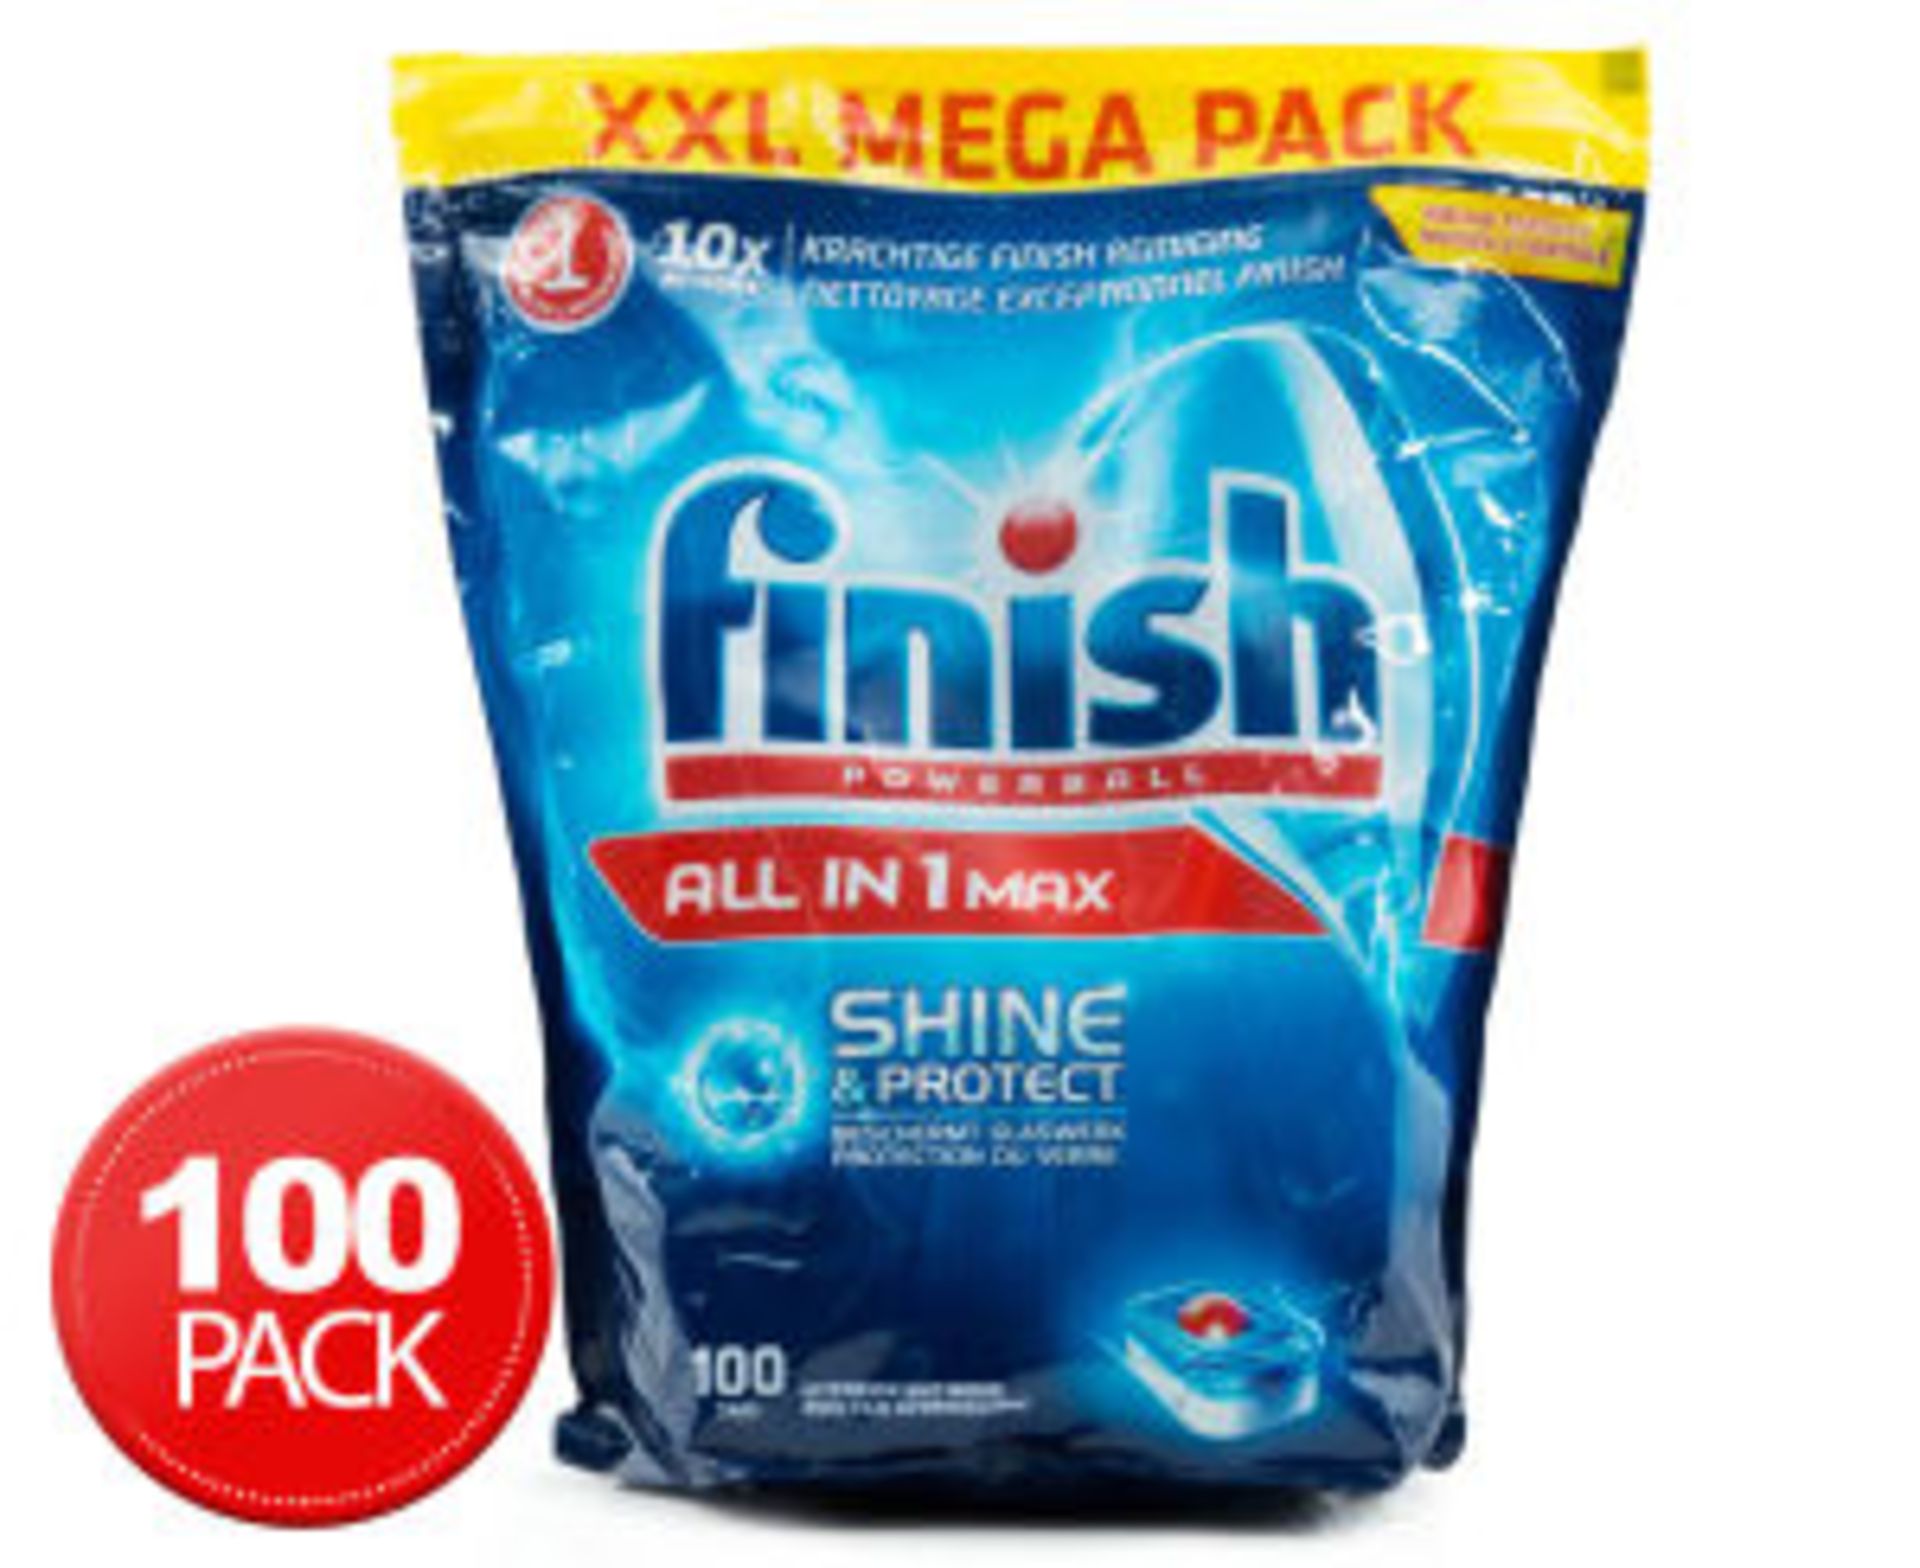 V Brand New Finish Powerball All In 1 Max Dishwasher Tablets RRP £25.00 X  3  Bid price to be